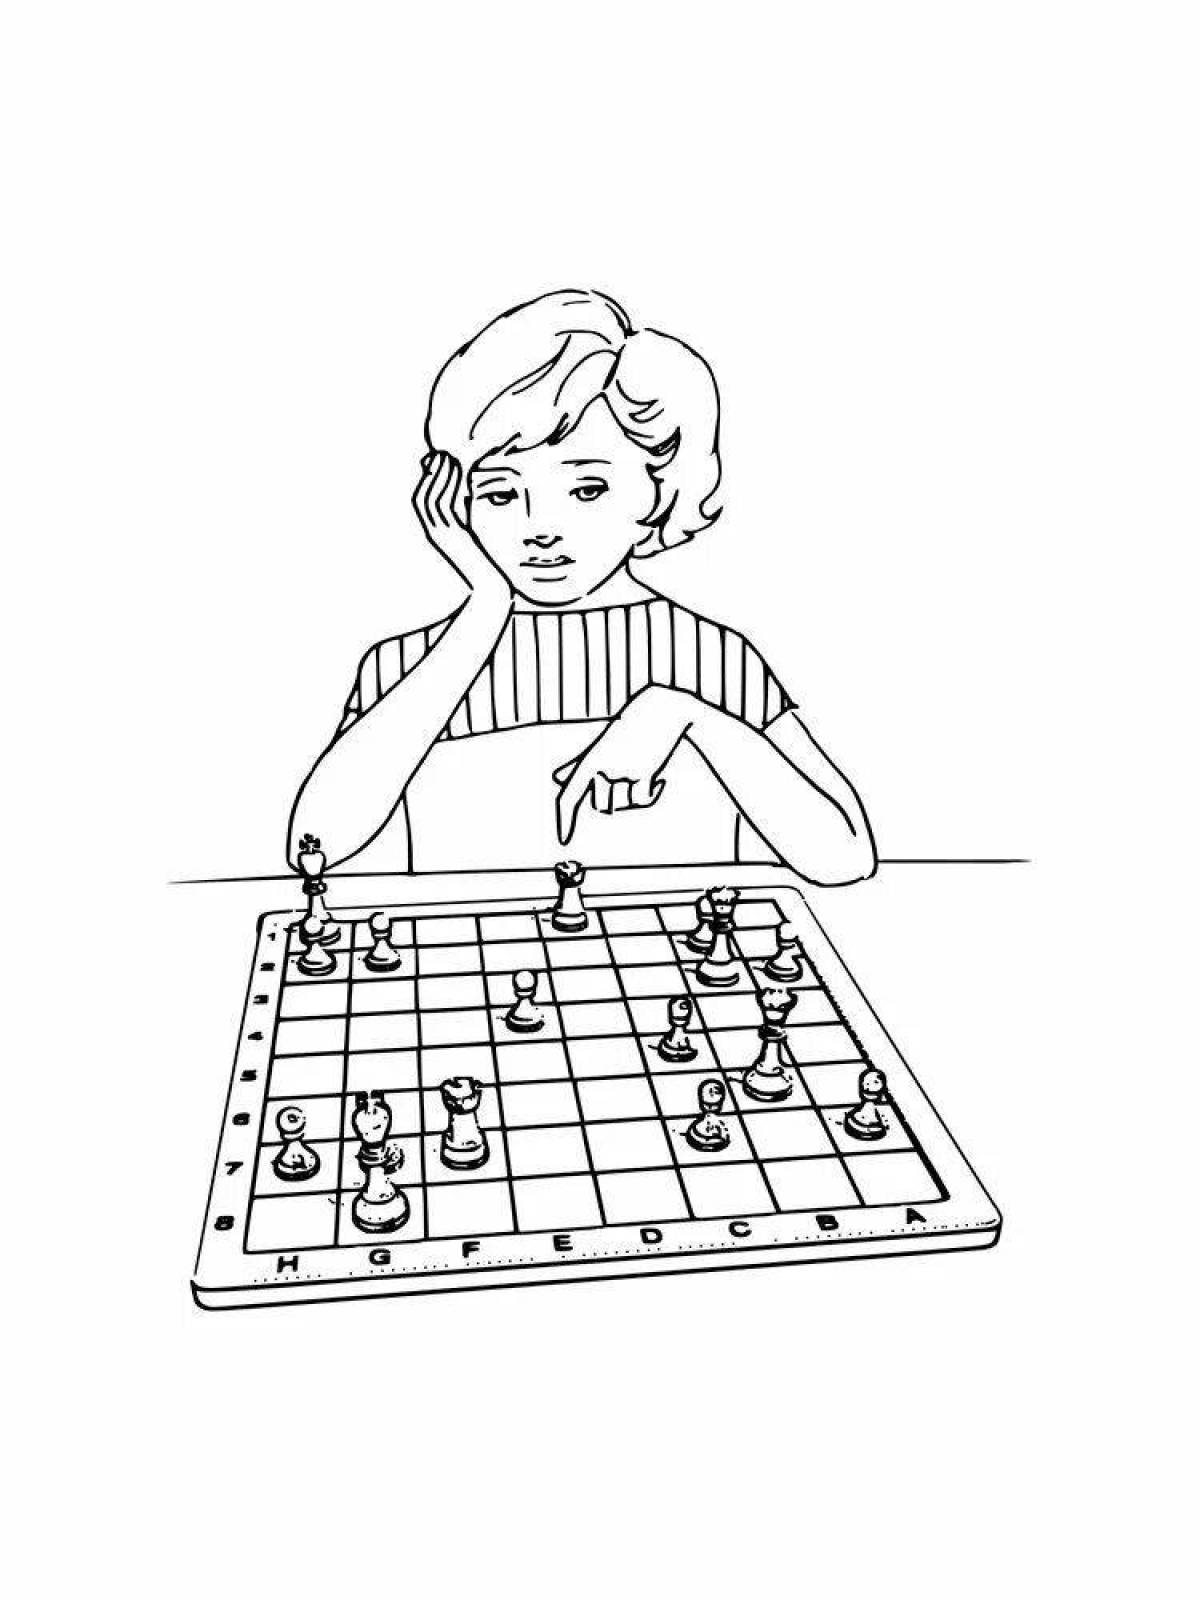 Colorful chess coloring pages for kids to learn